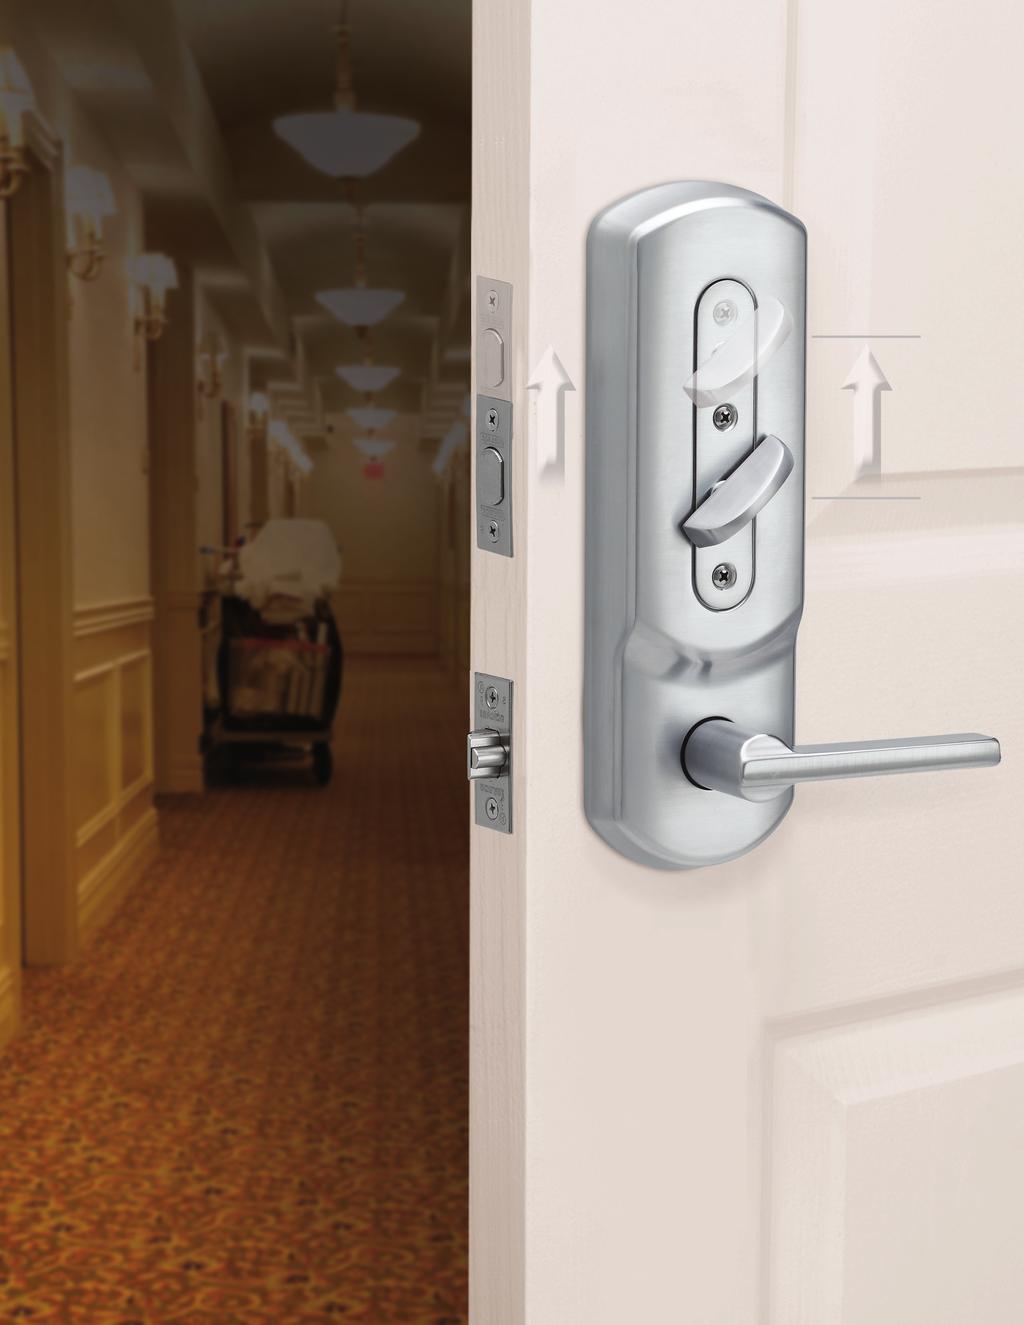 CS 210/RS 210 Series Interconnected Lock Introducing the Schlage Interconnected lock.